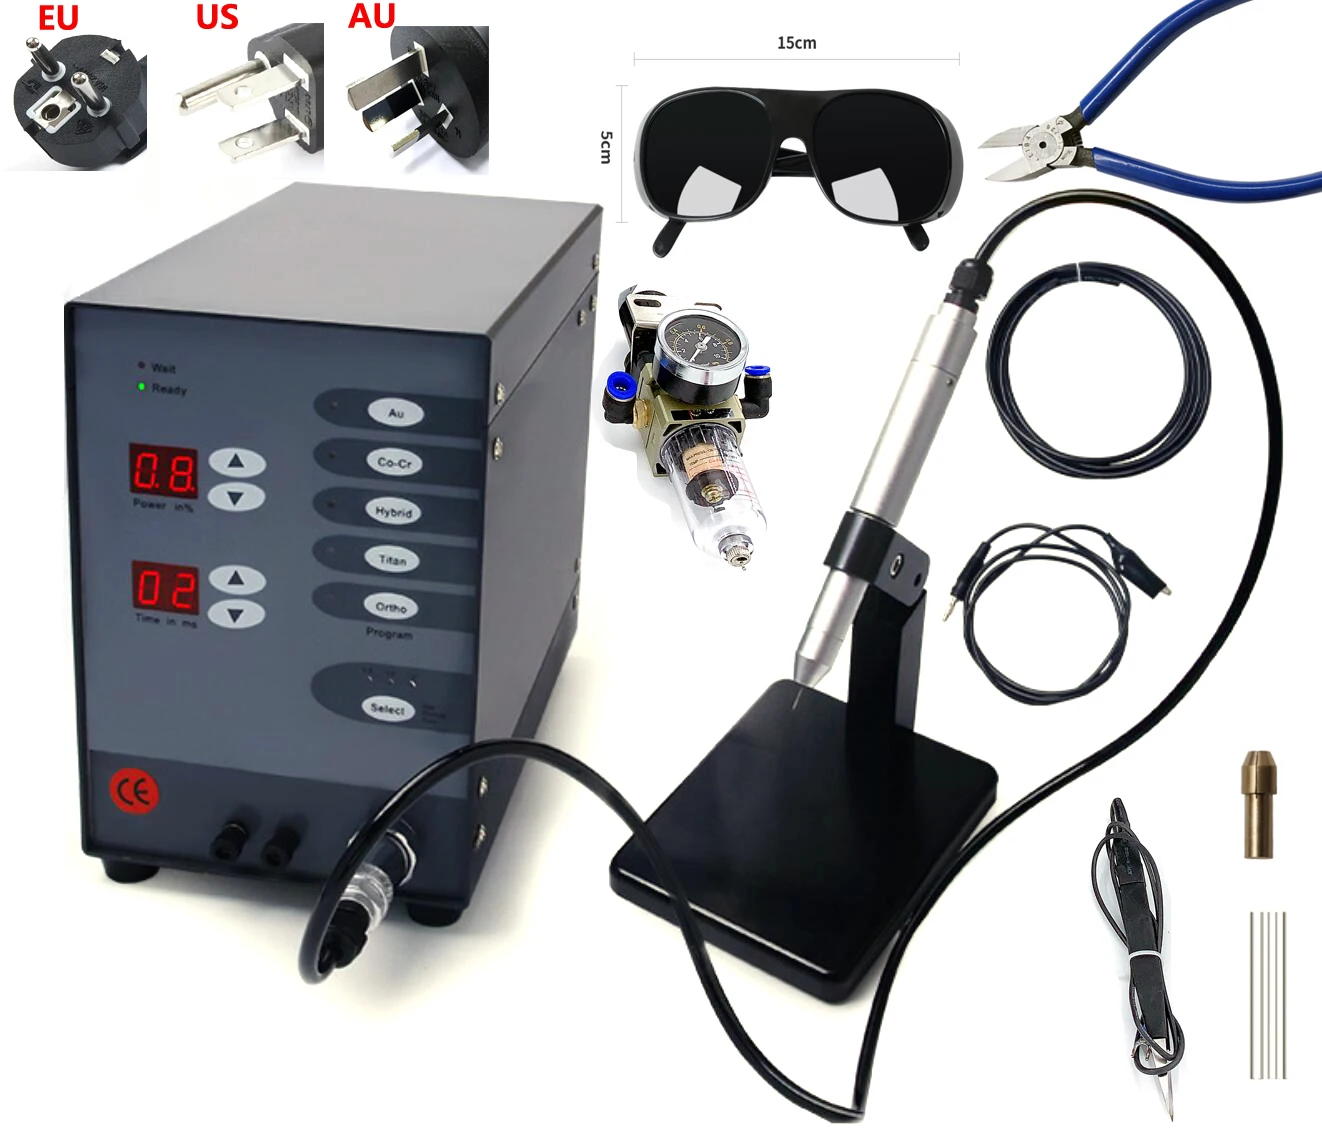 220V Stainless Steel Spot Laser Welding Machine Automatic Numerical Control Touch Pulse Argon Arc Welder for Soldering Jewelry